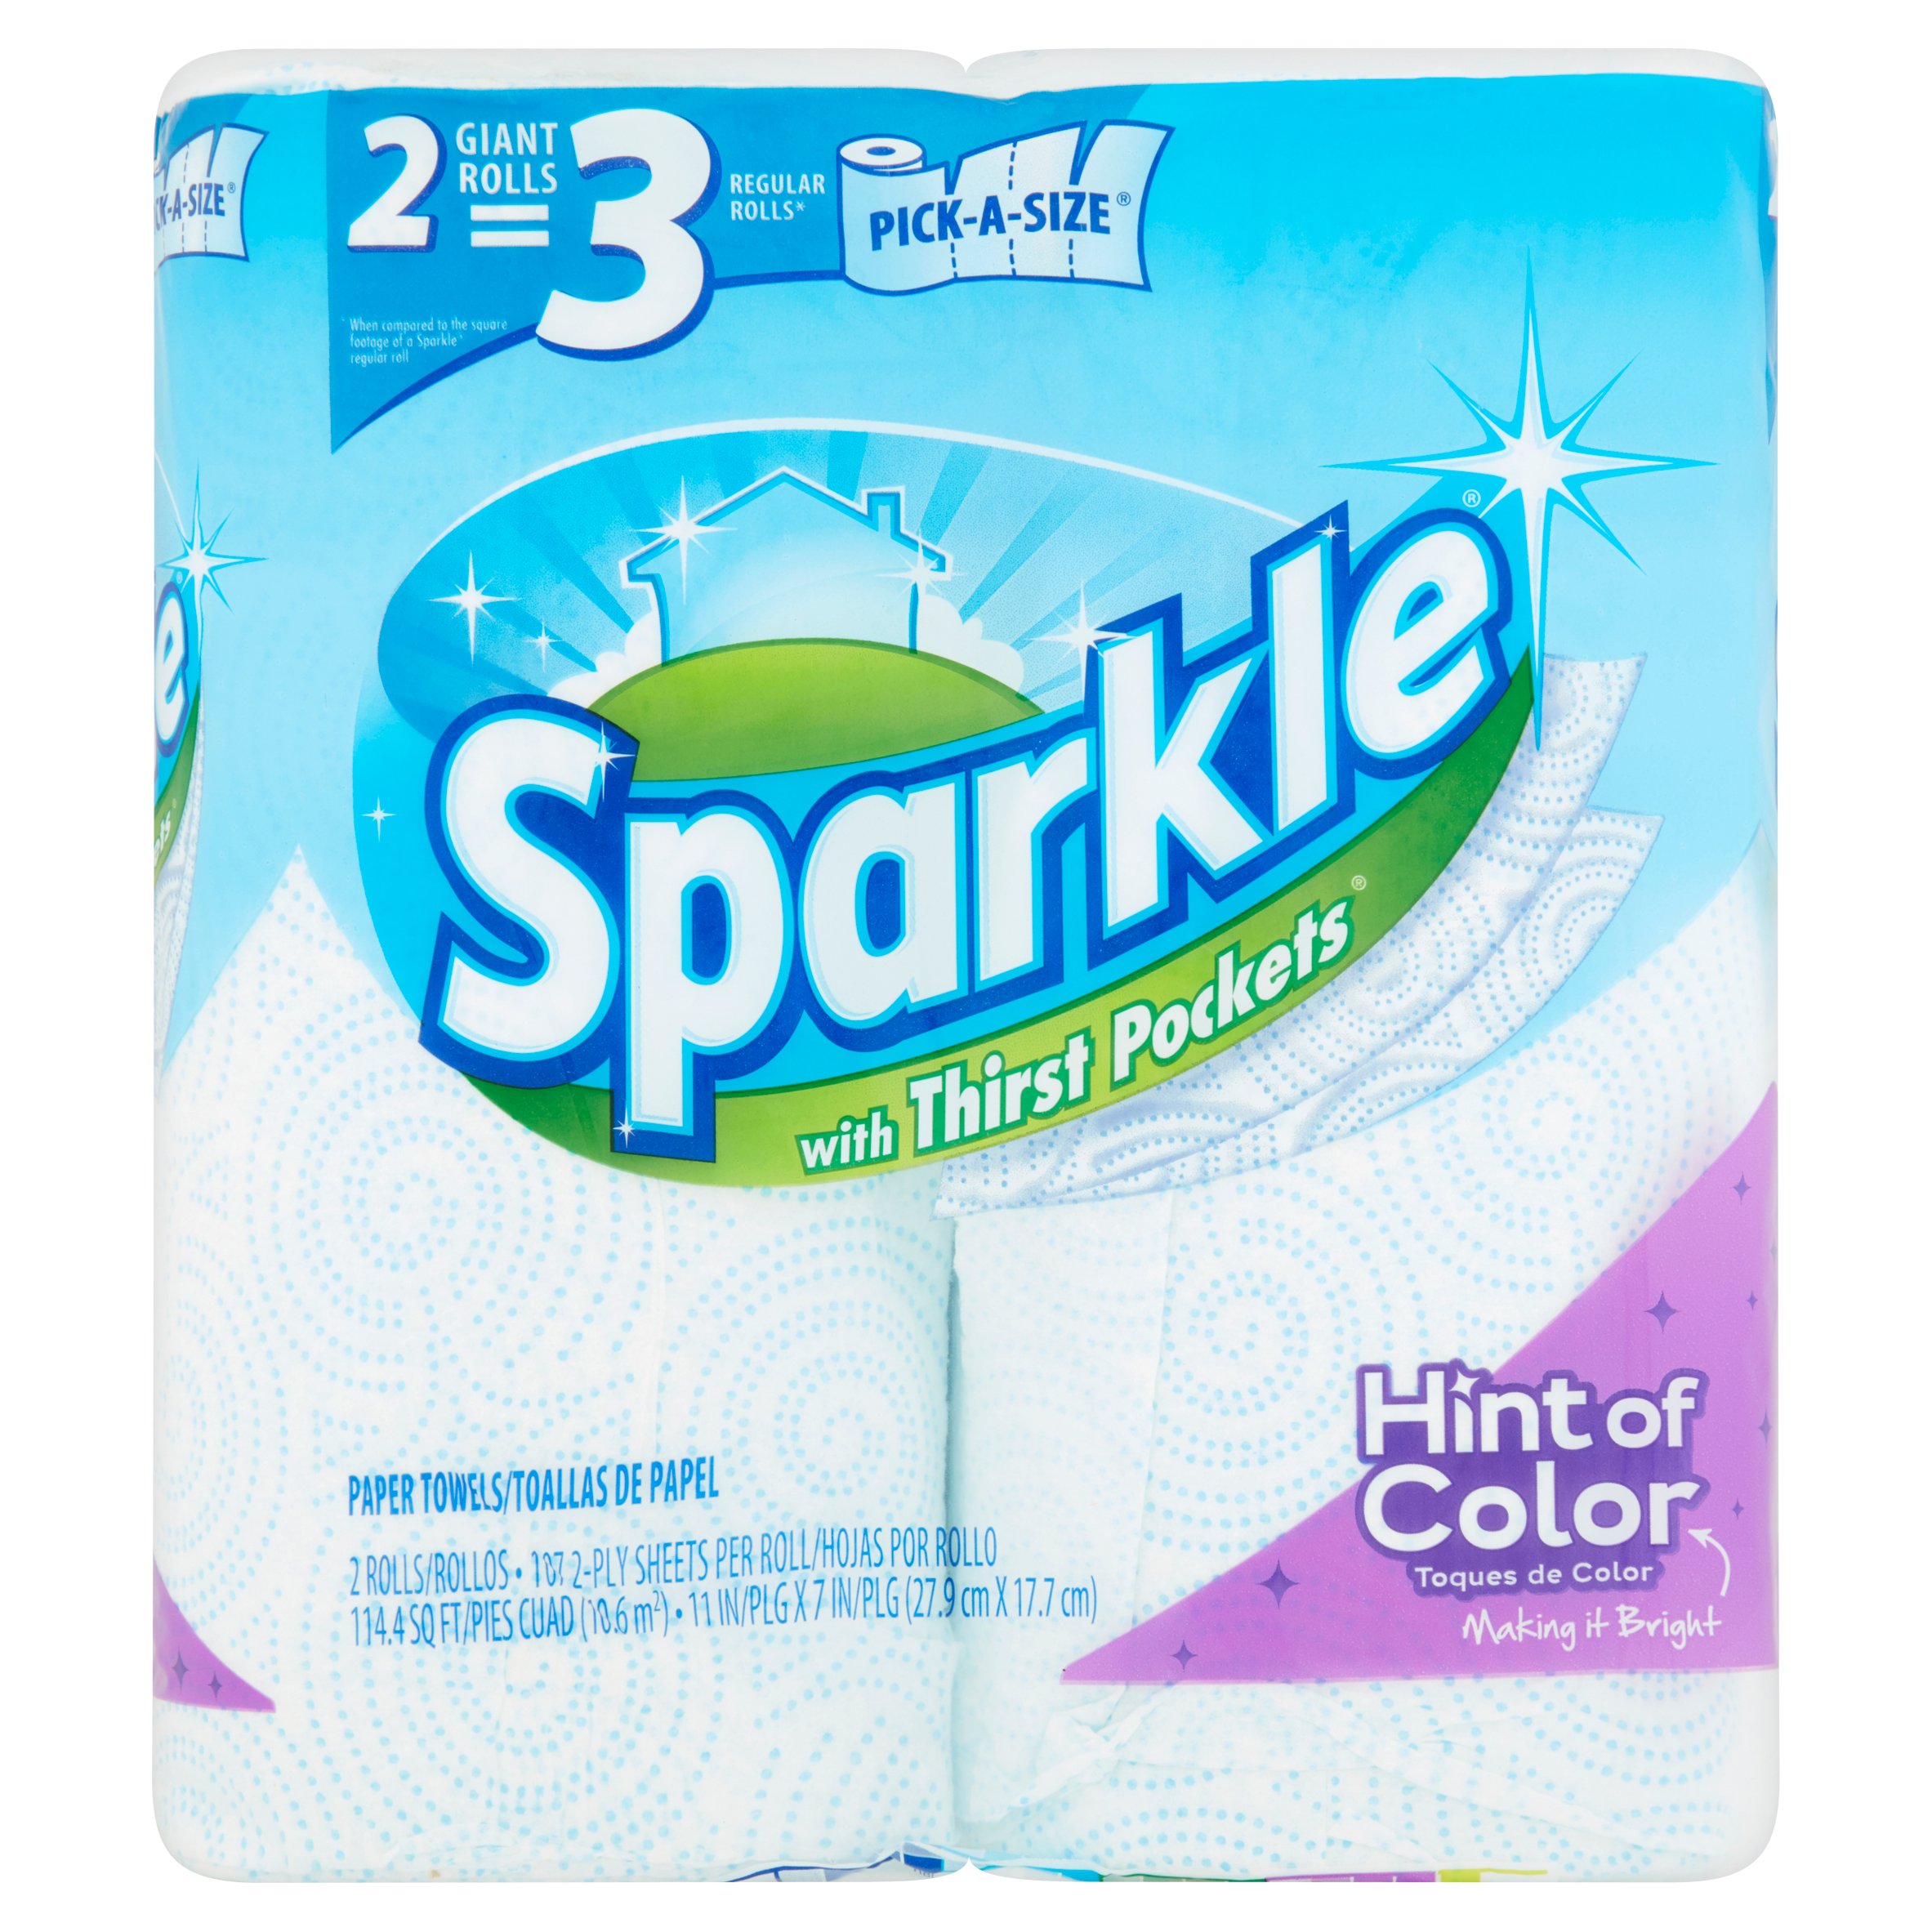 Sparkle Paper Towels with Thirst Pockets Rolls, 2 count - image 1 of 5